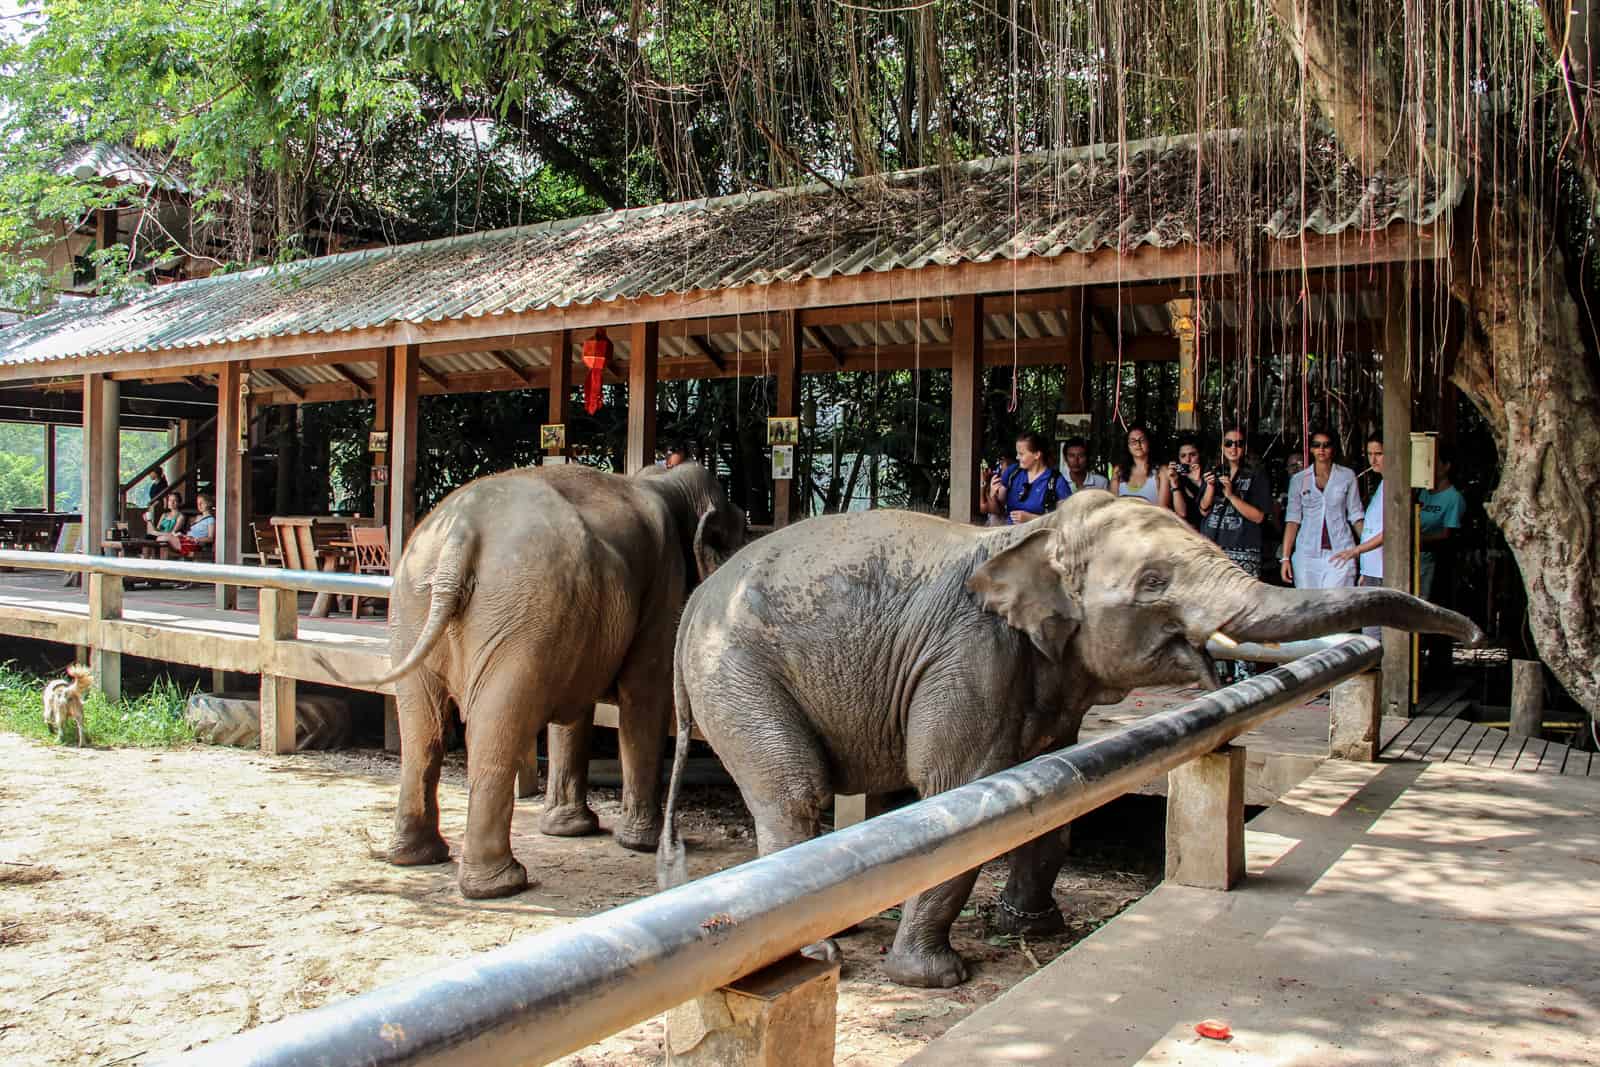 Hungry elephants being fed by visitors at the Elephant Nature Park in Chiang Mai, Thailand